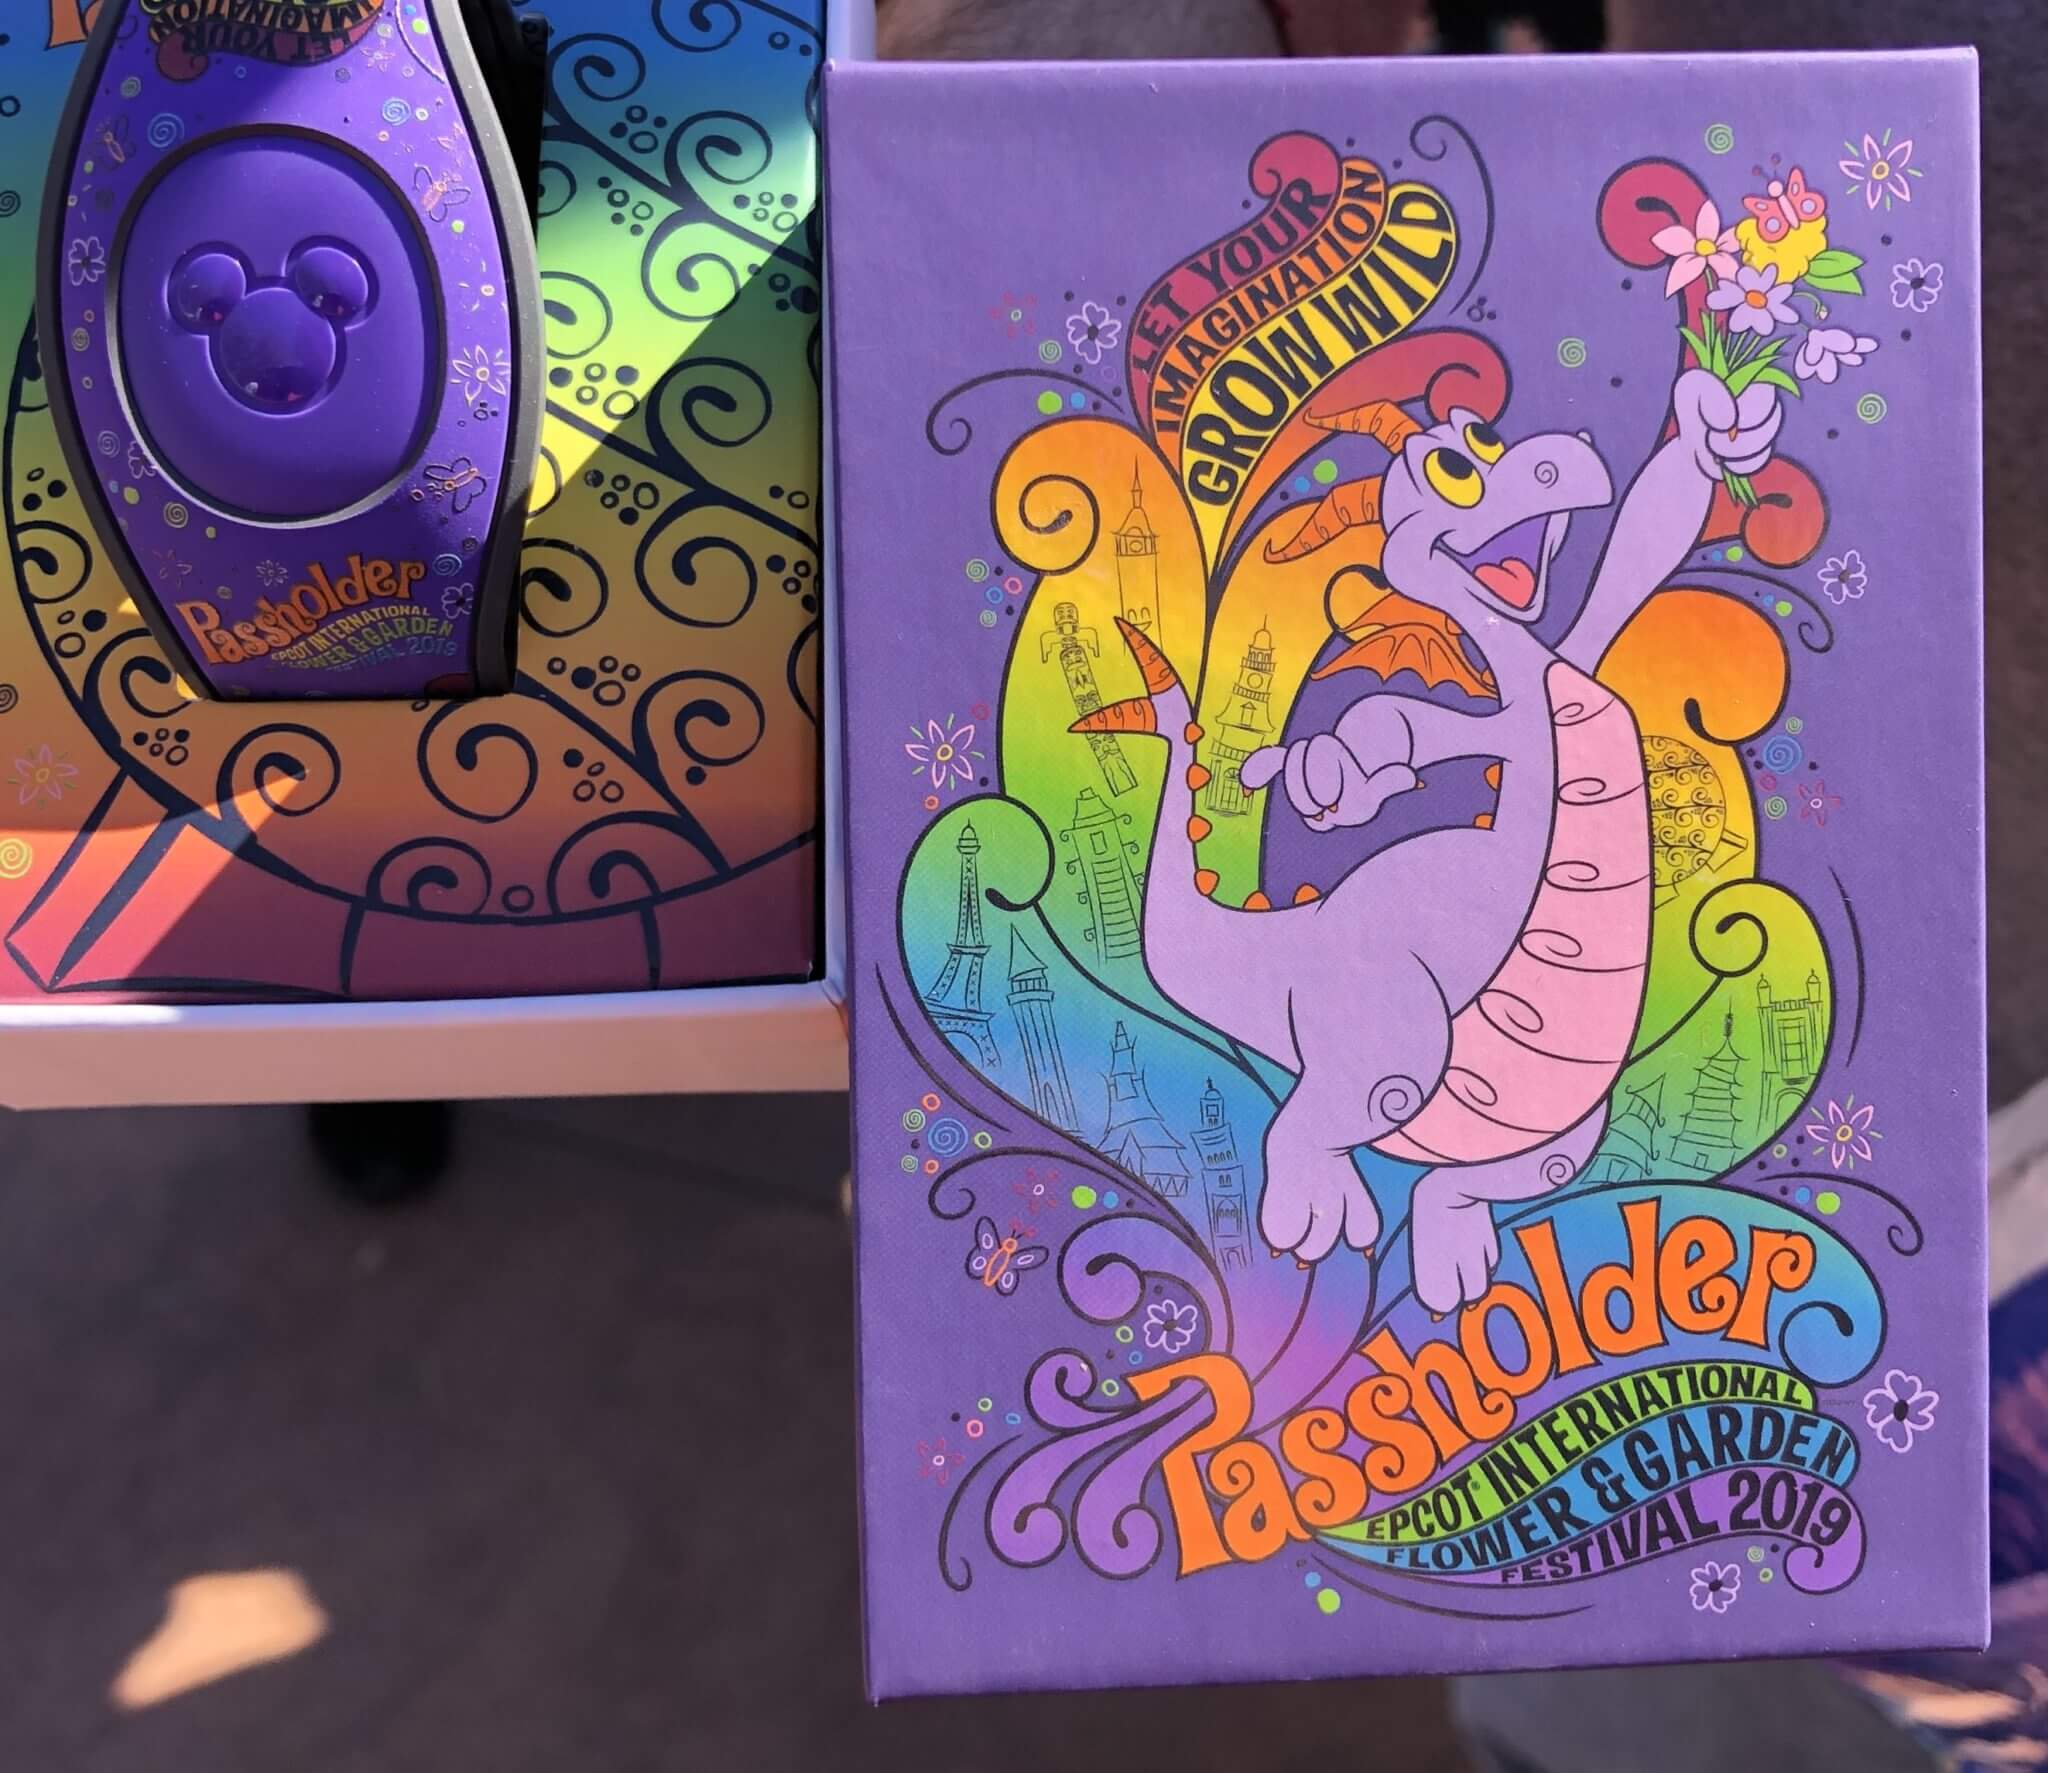 Figment Annual Passholder magic band at epcot flower and garden festival 2019